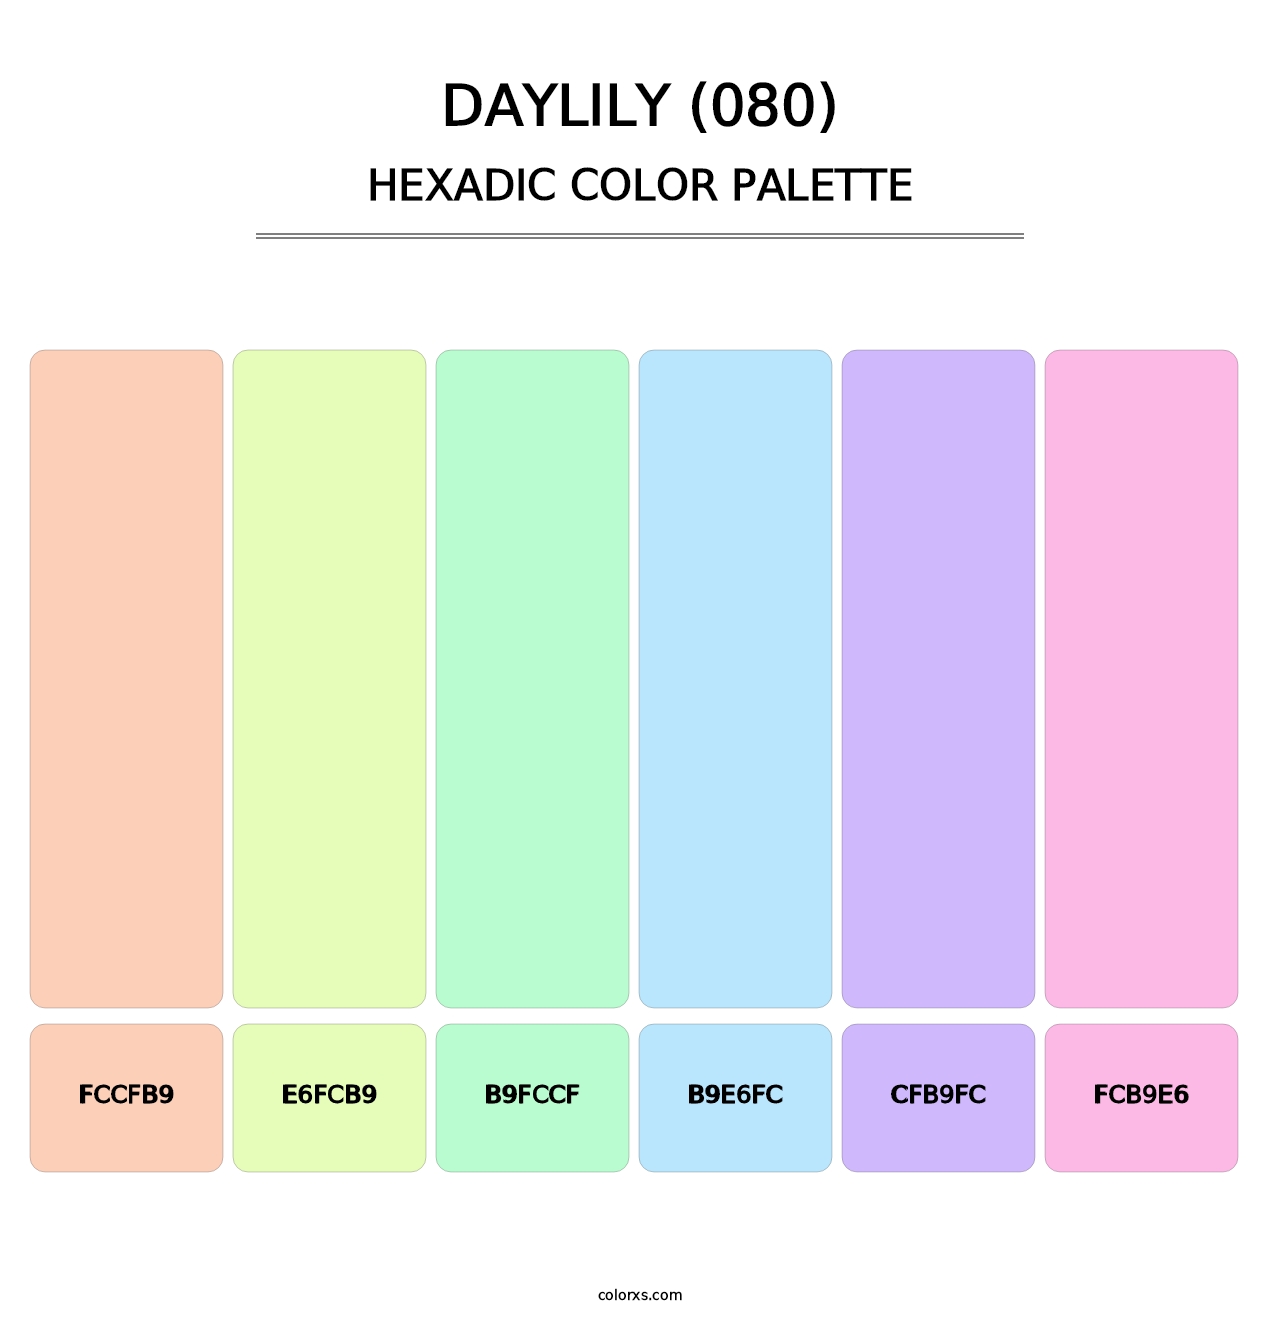 Daylily (080) - Hexadic Color Palette